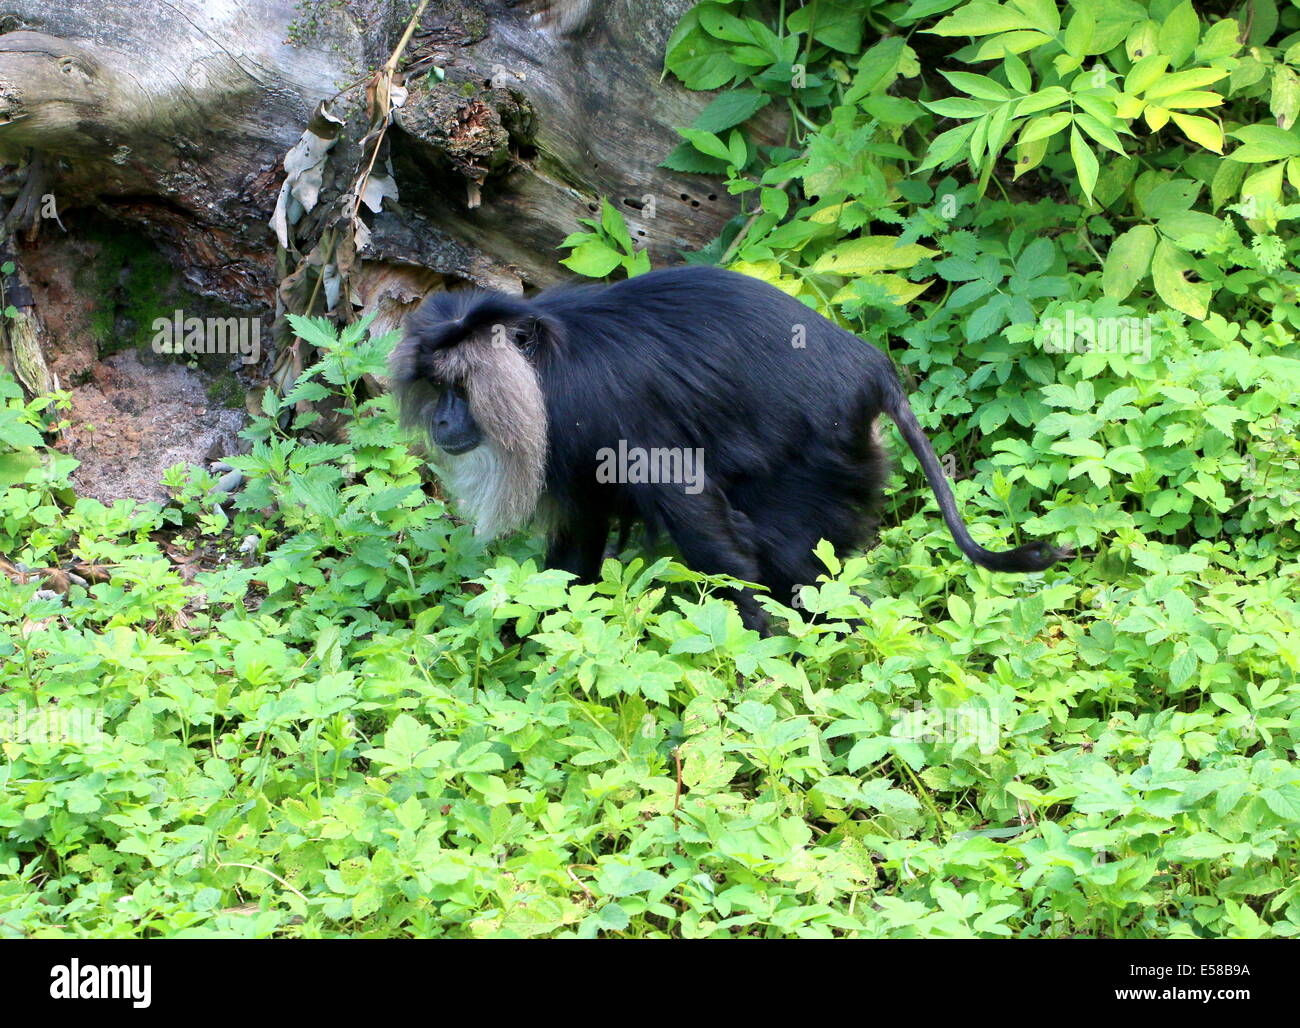 Close-up of a Lion-tailed macaque or Wanderoo (Macaca silenus) Stock Photo